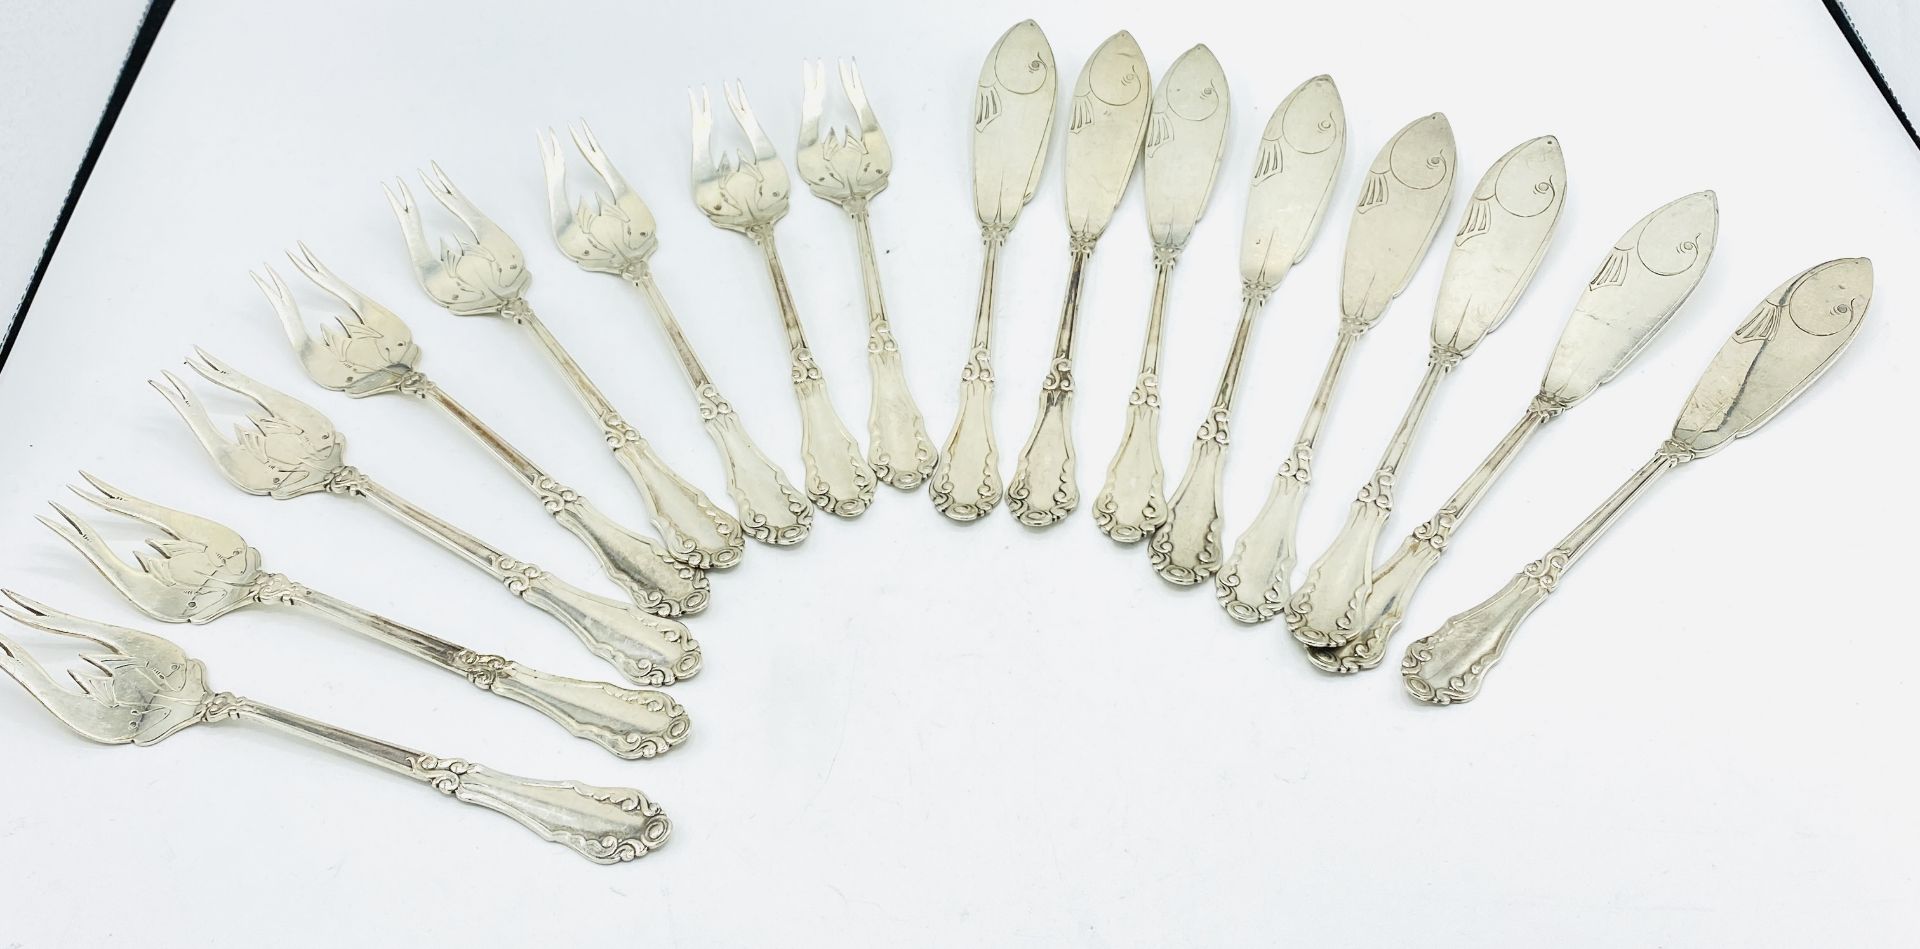 8 piece silver fish cutlery setting by Peter Hertz Of Denmark